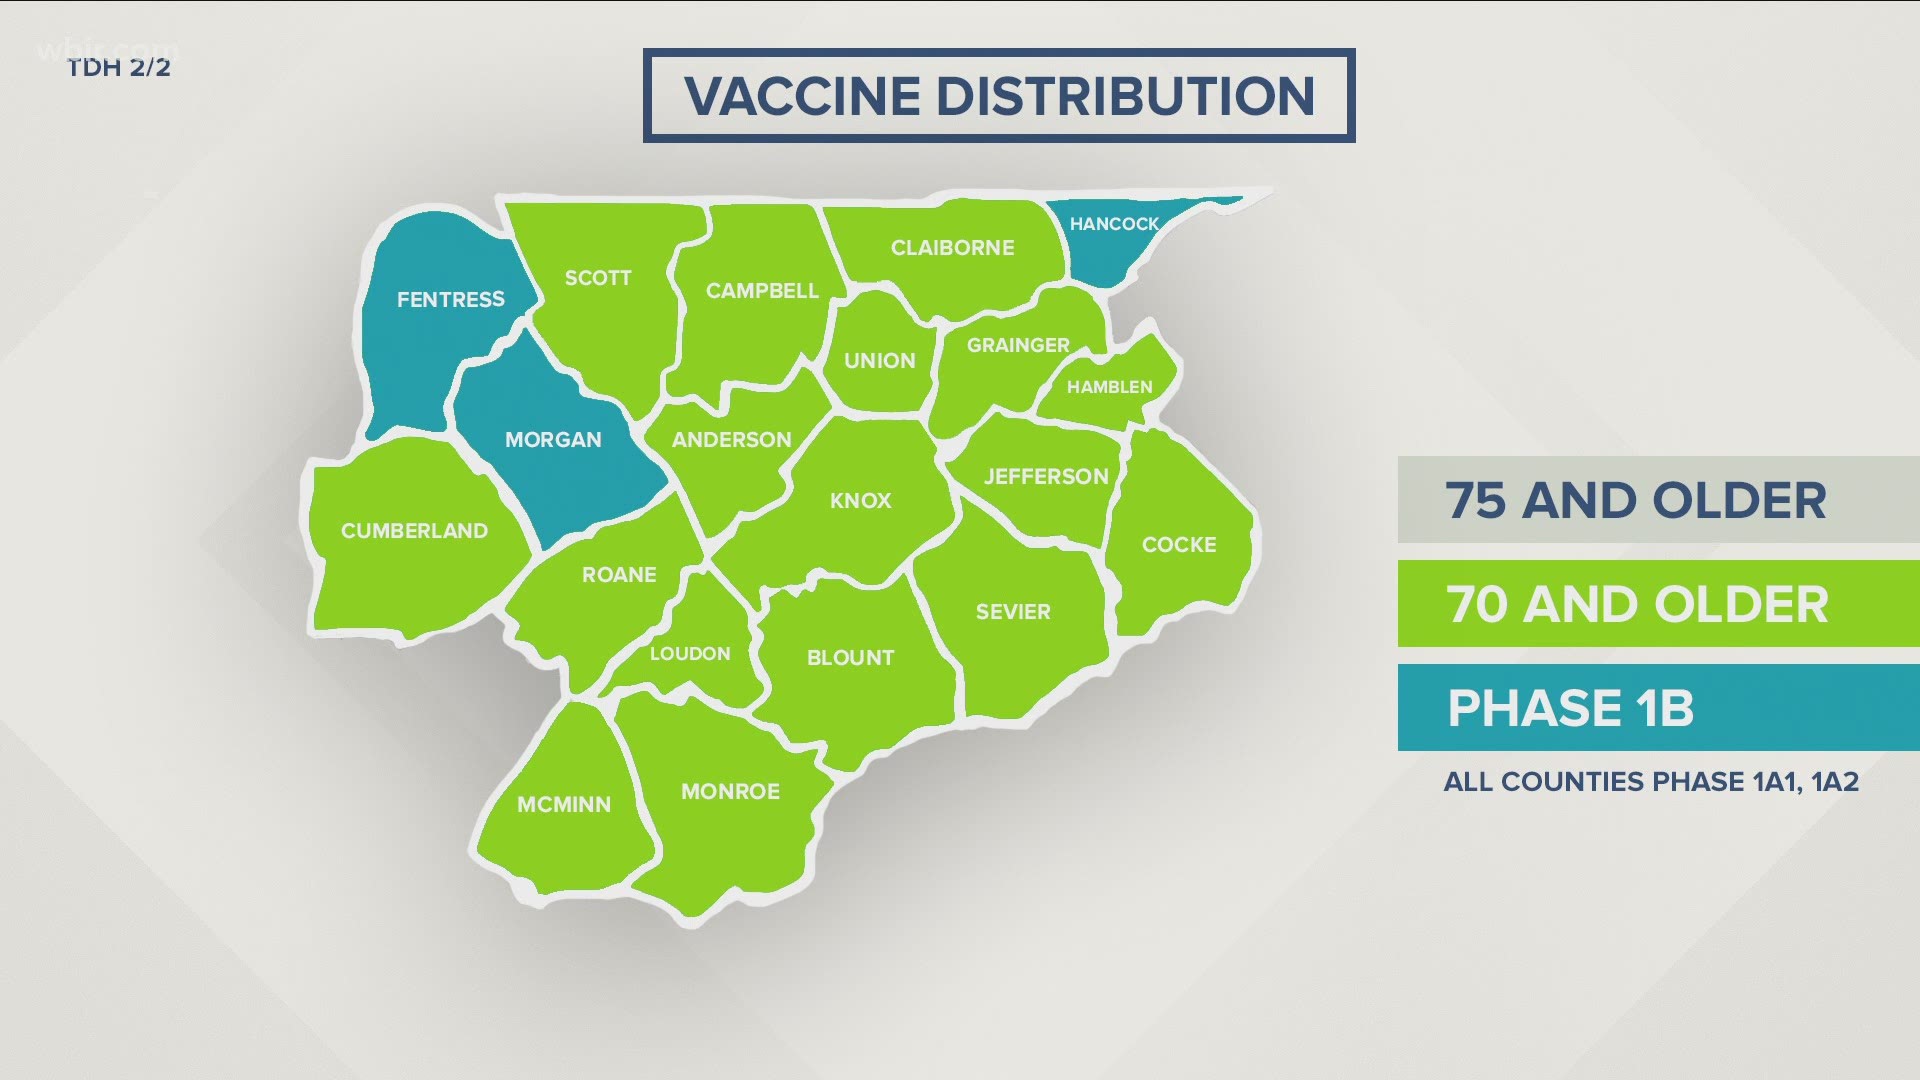 State leaders say they are expecting more vaccines in the coming weeks.